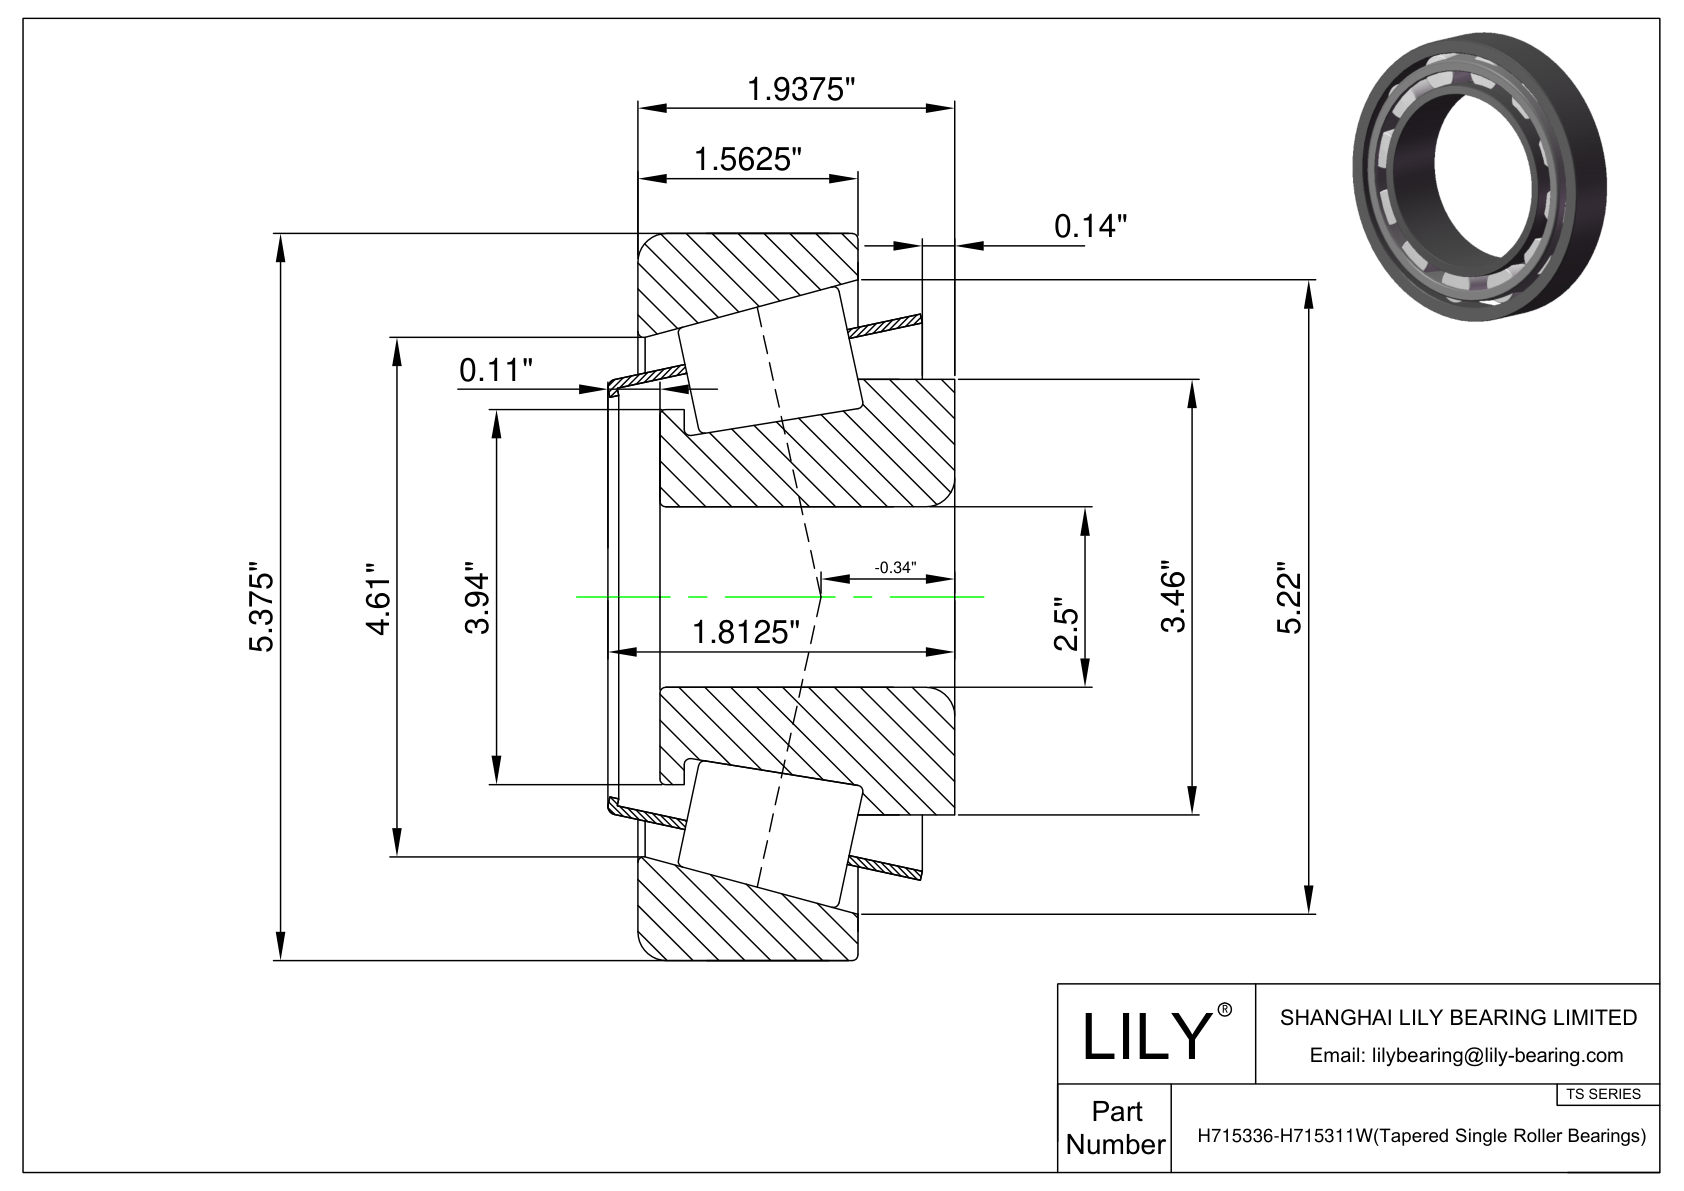 H715336-H715311W TS (Tapered Single Roller Bearings) (Imperial) cad drawing